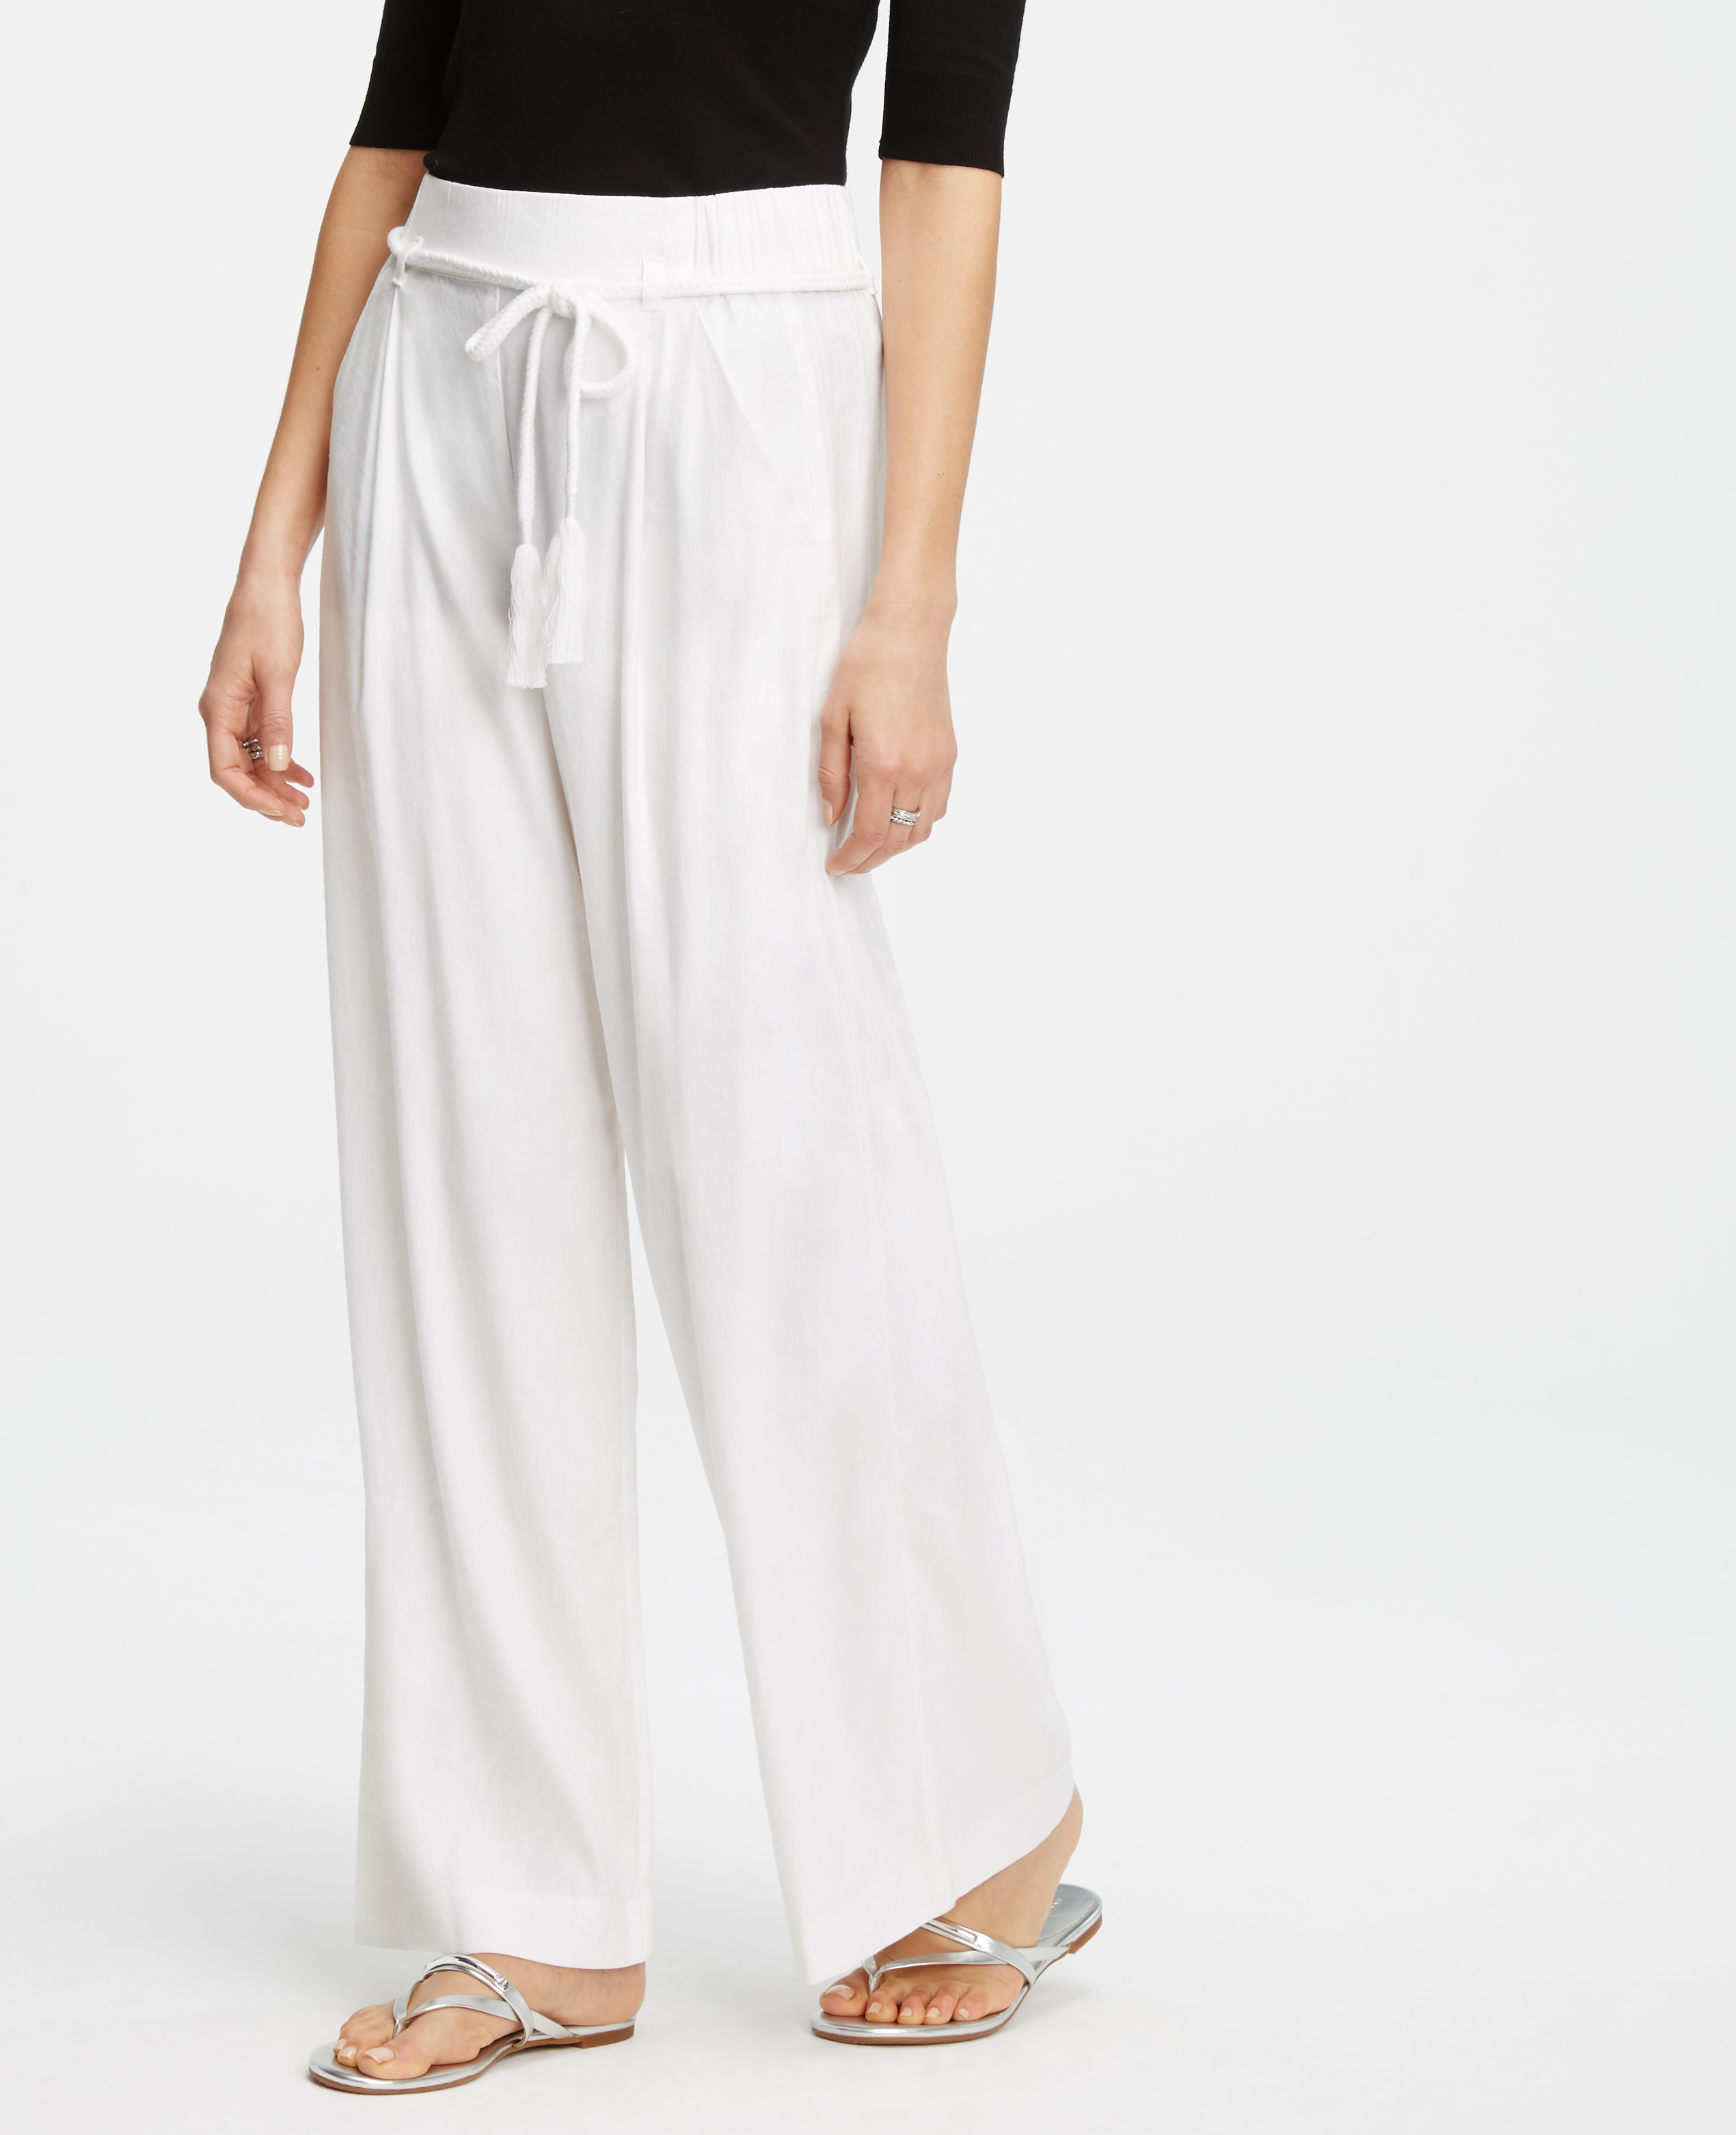 Ann taylor Petite Belted Linen Blend Pants in White | Lyst